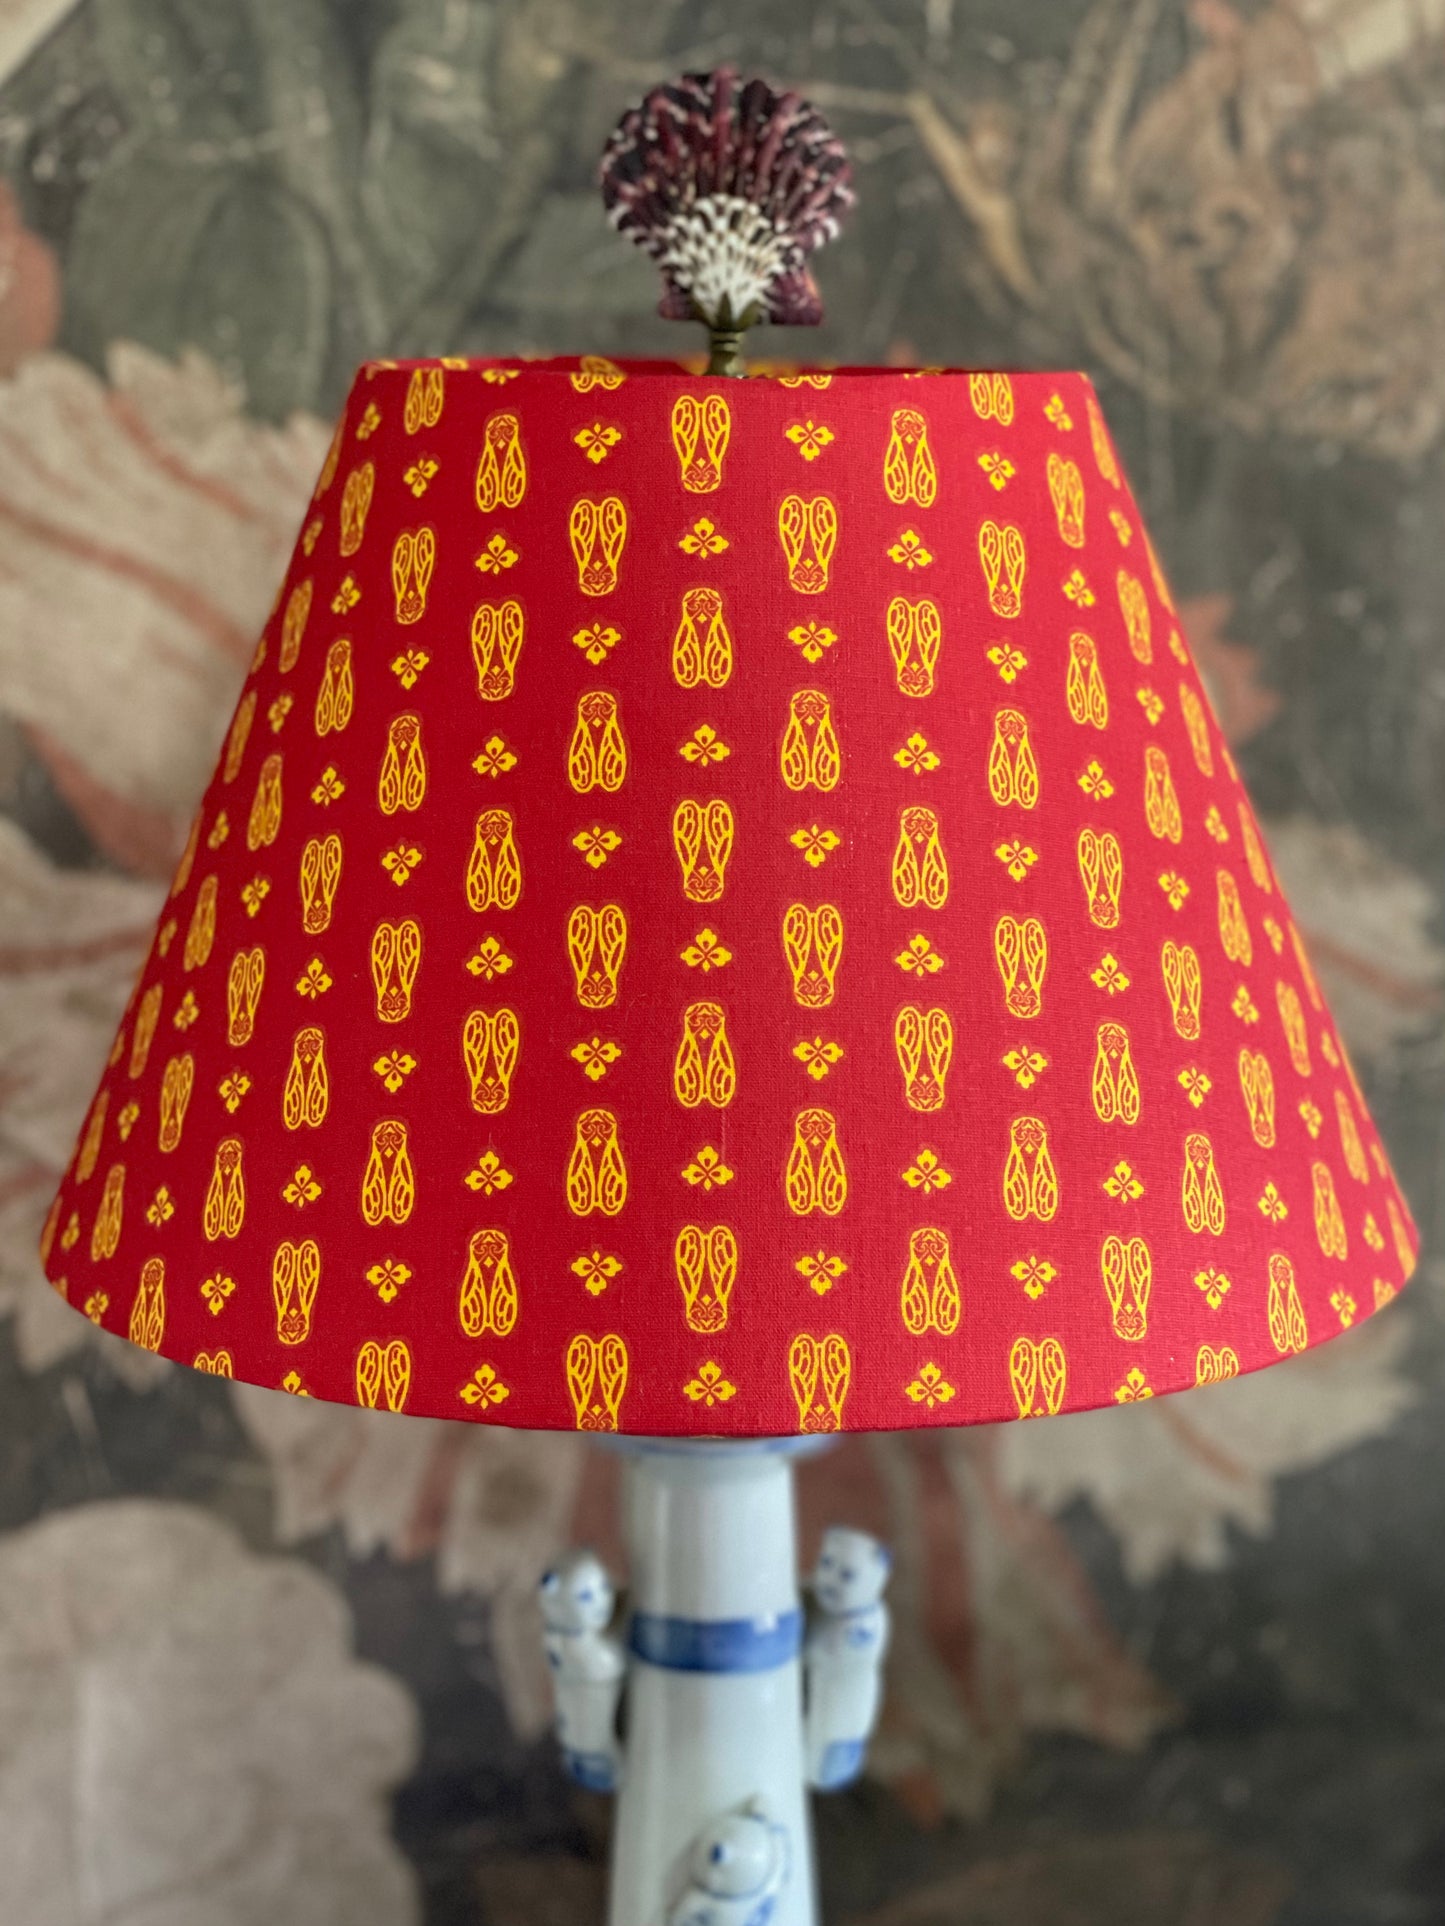 Small Conical Lampshade. Darling Provençal "Cicada" print in Tomato Red and Yellow/Orange.